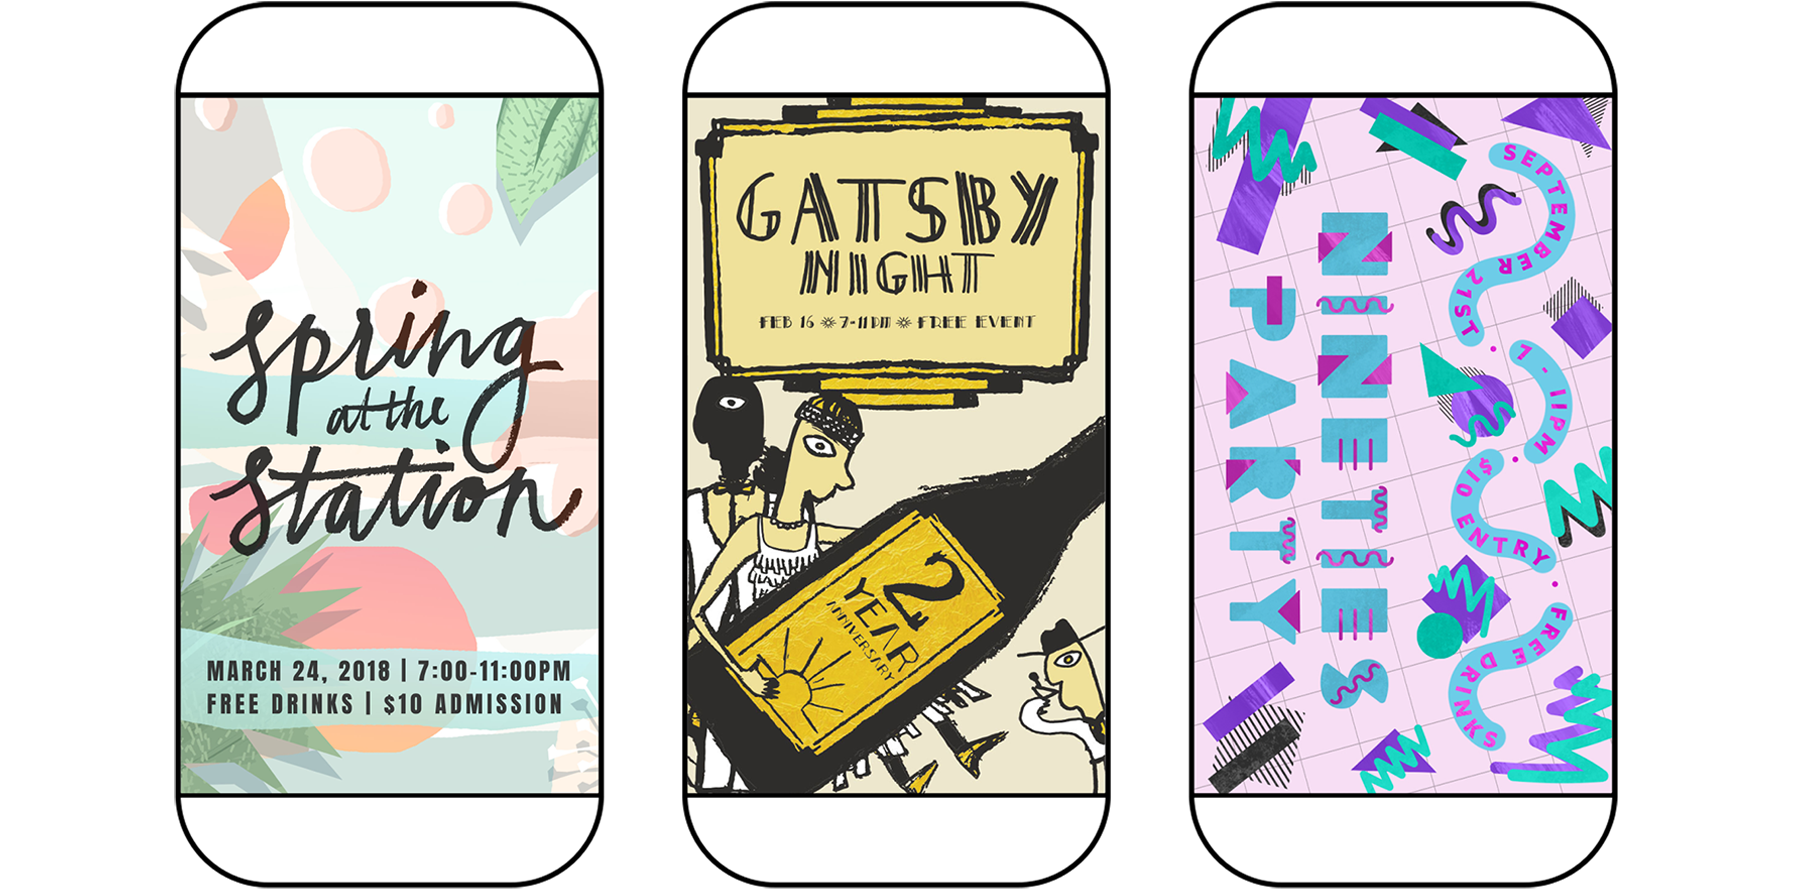 Animated event graphics for The Station. Hand lettering reads Spring at the Station, Gatsby Night, and Nineties Party with colorful organic abstract illustrations.